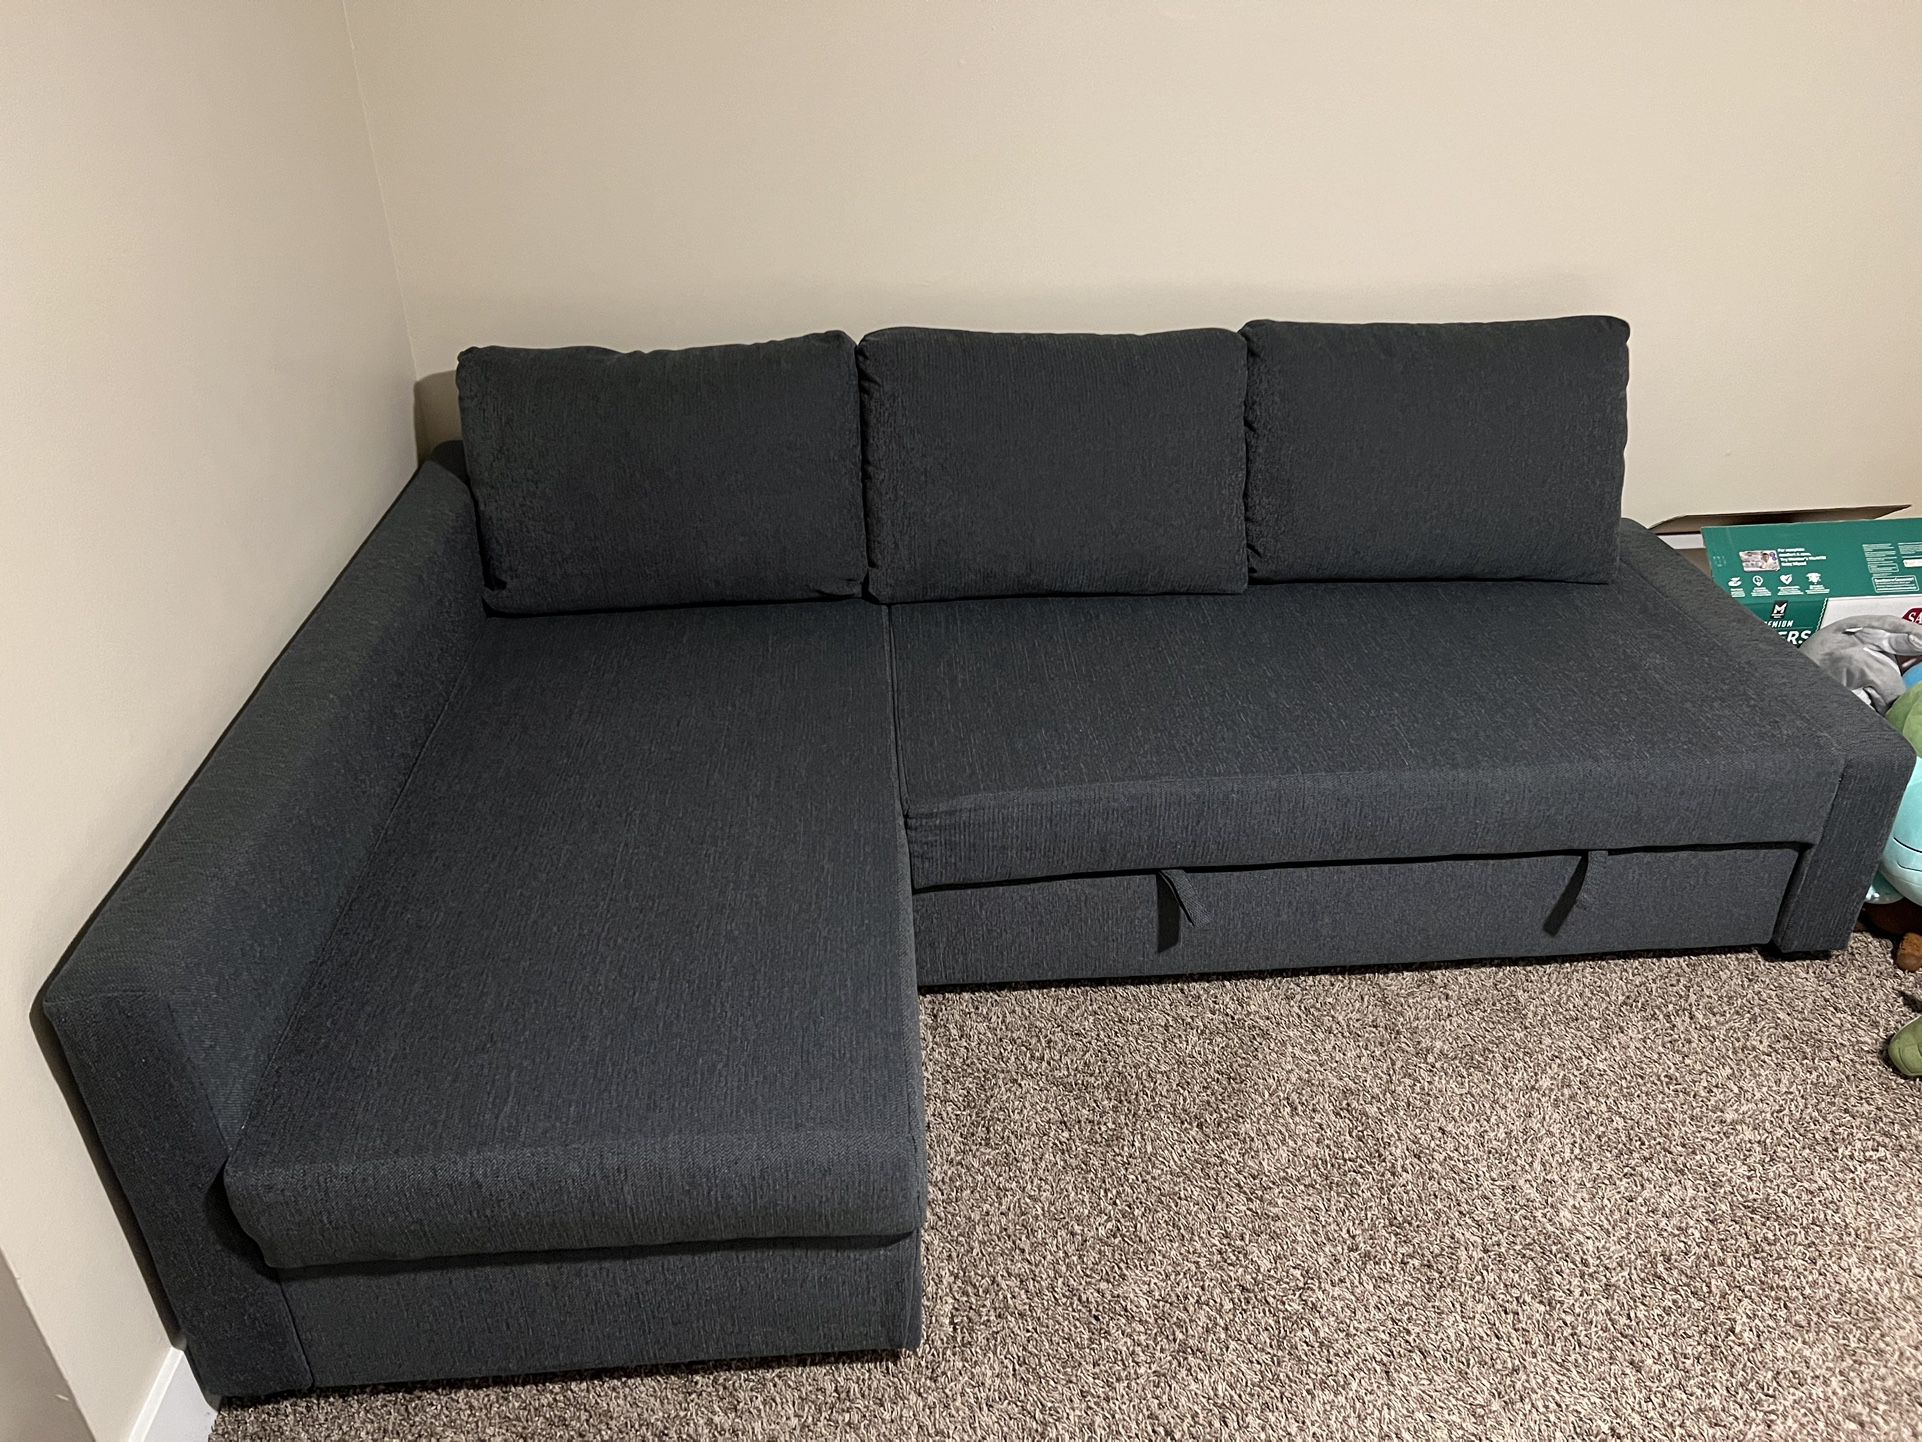 IKEA Holmsund Sleeper Sectional And Tussoy Mattress Topper